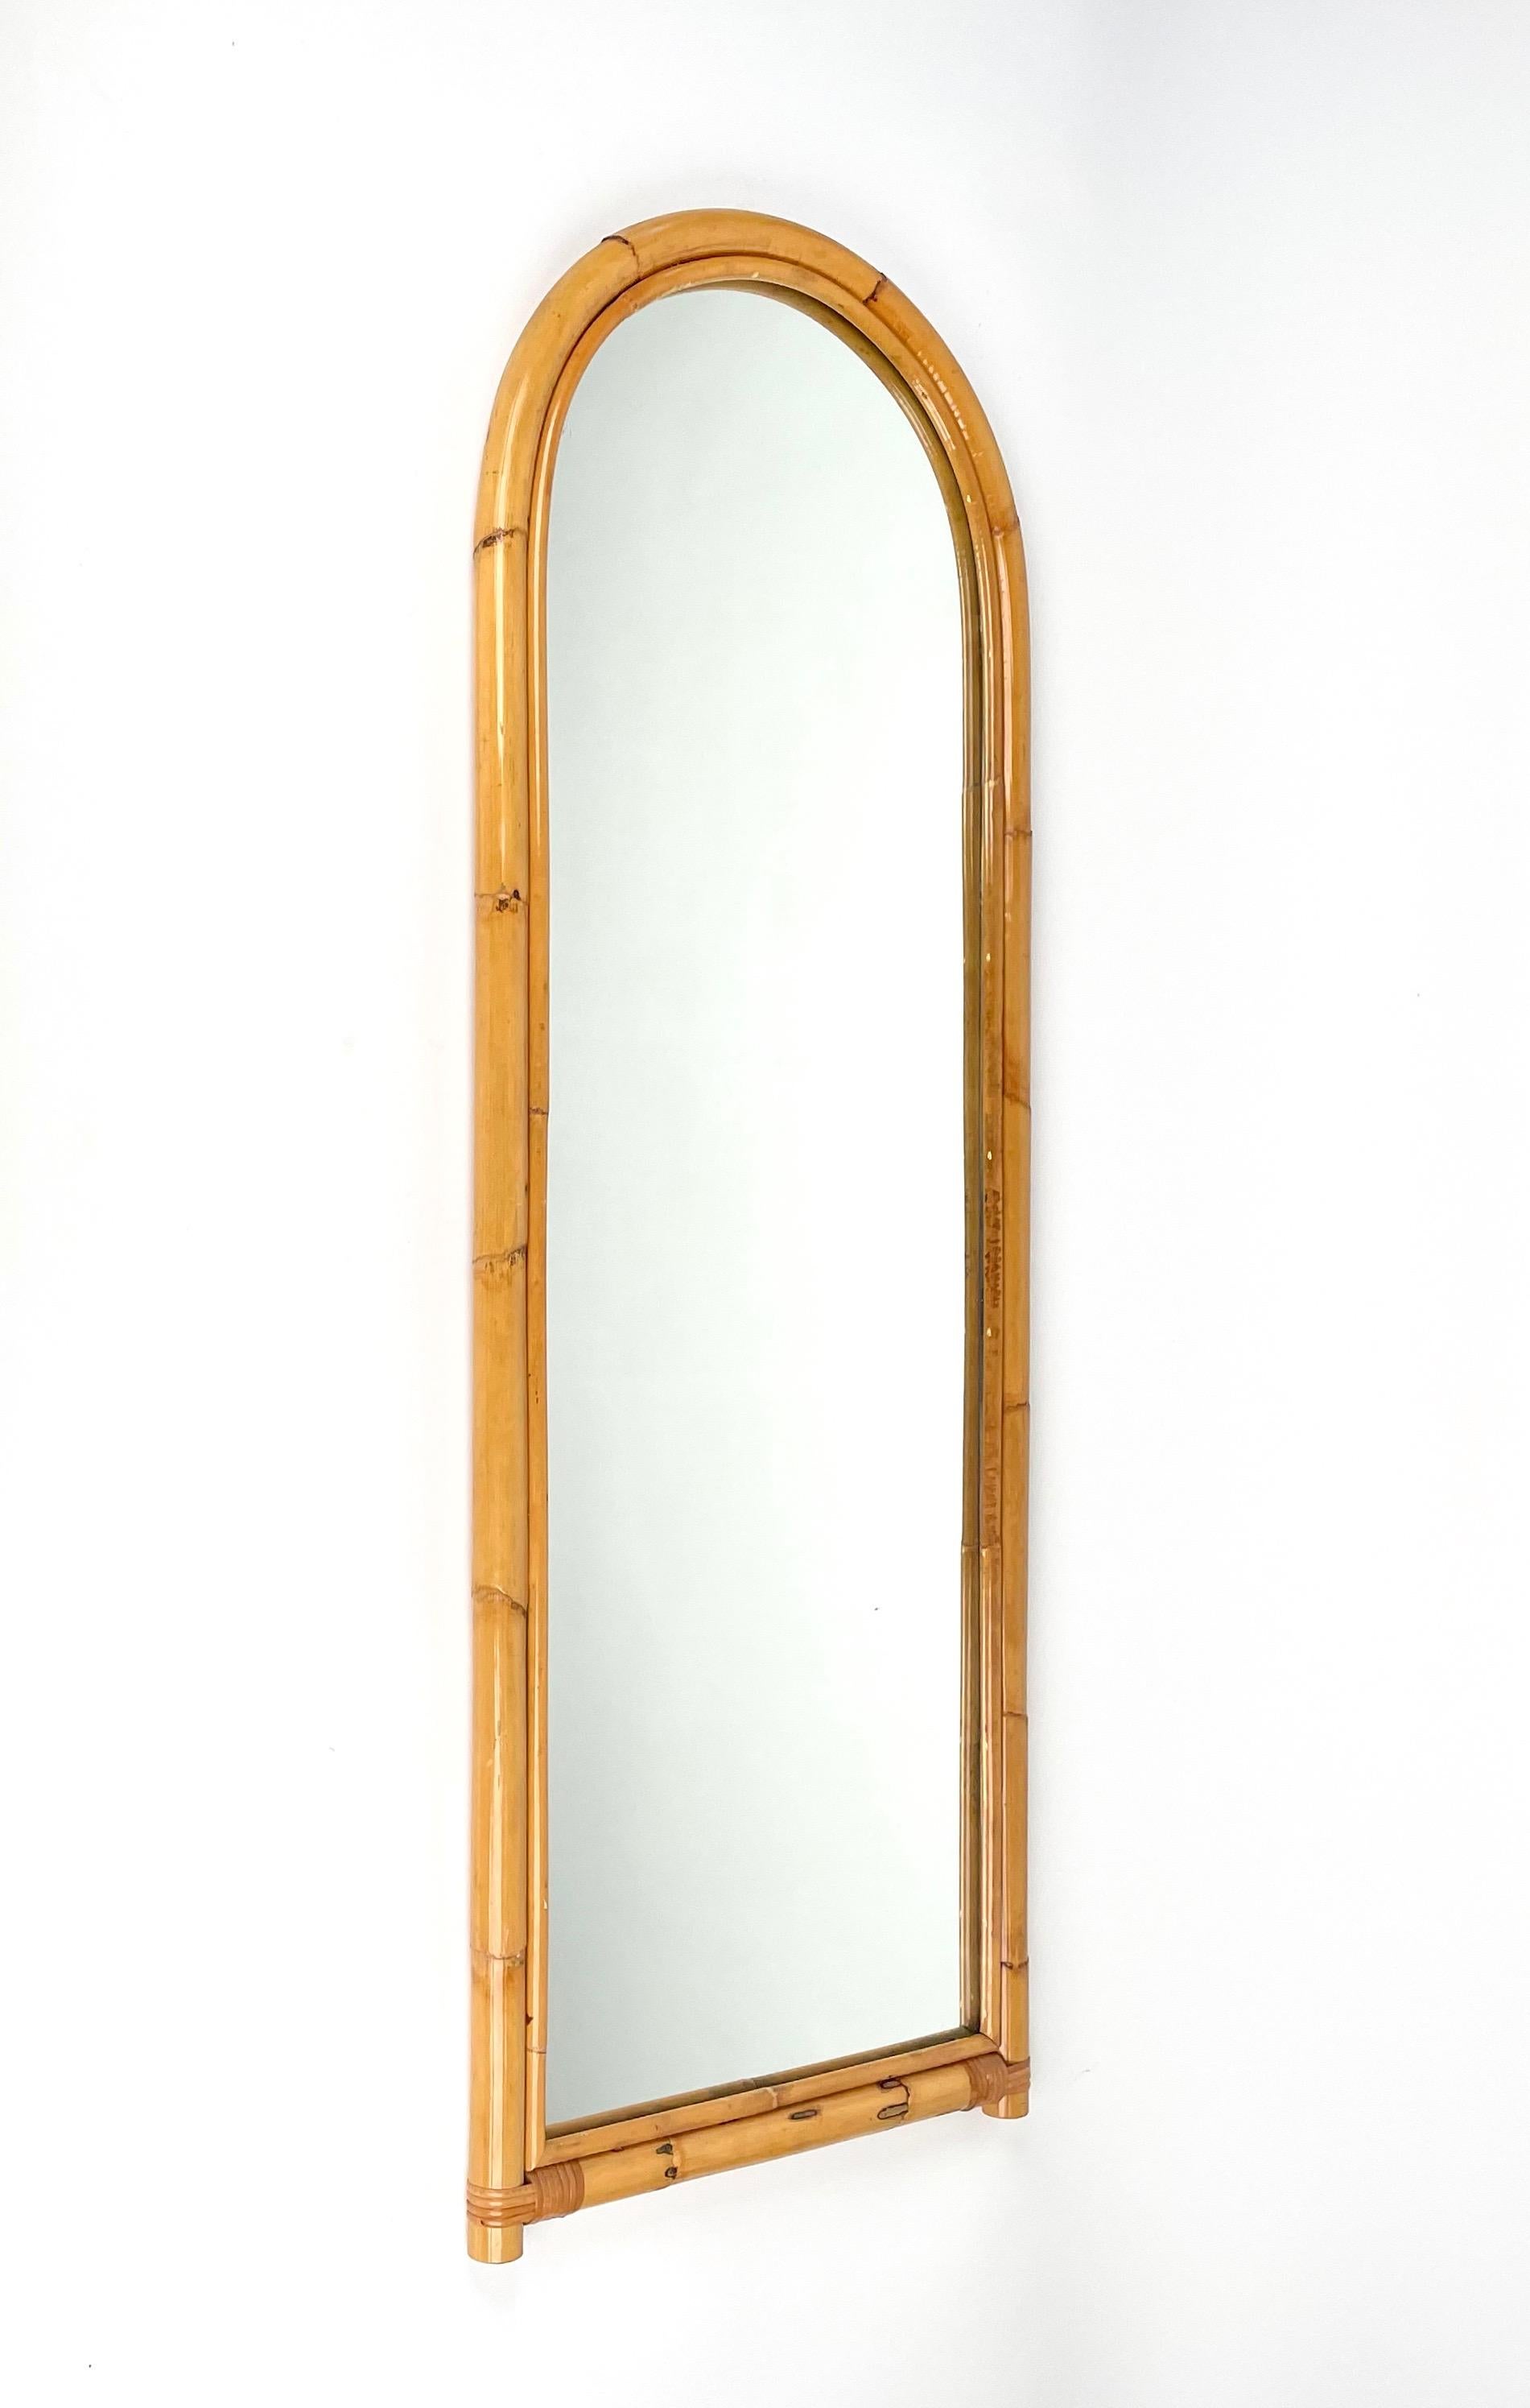 Bamboo and Rattan arched wall mirror.

Made in Italy in the Italy 1970s.